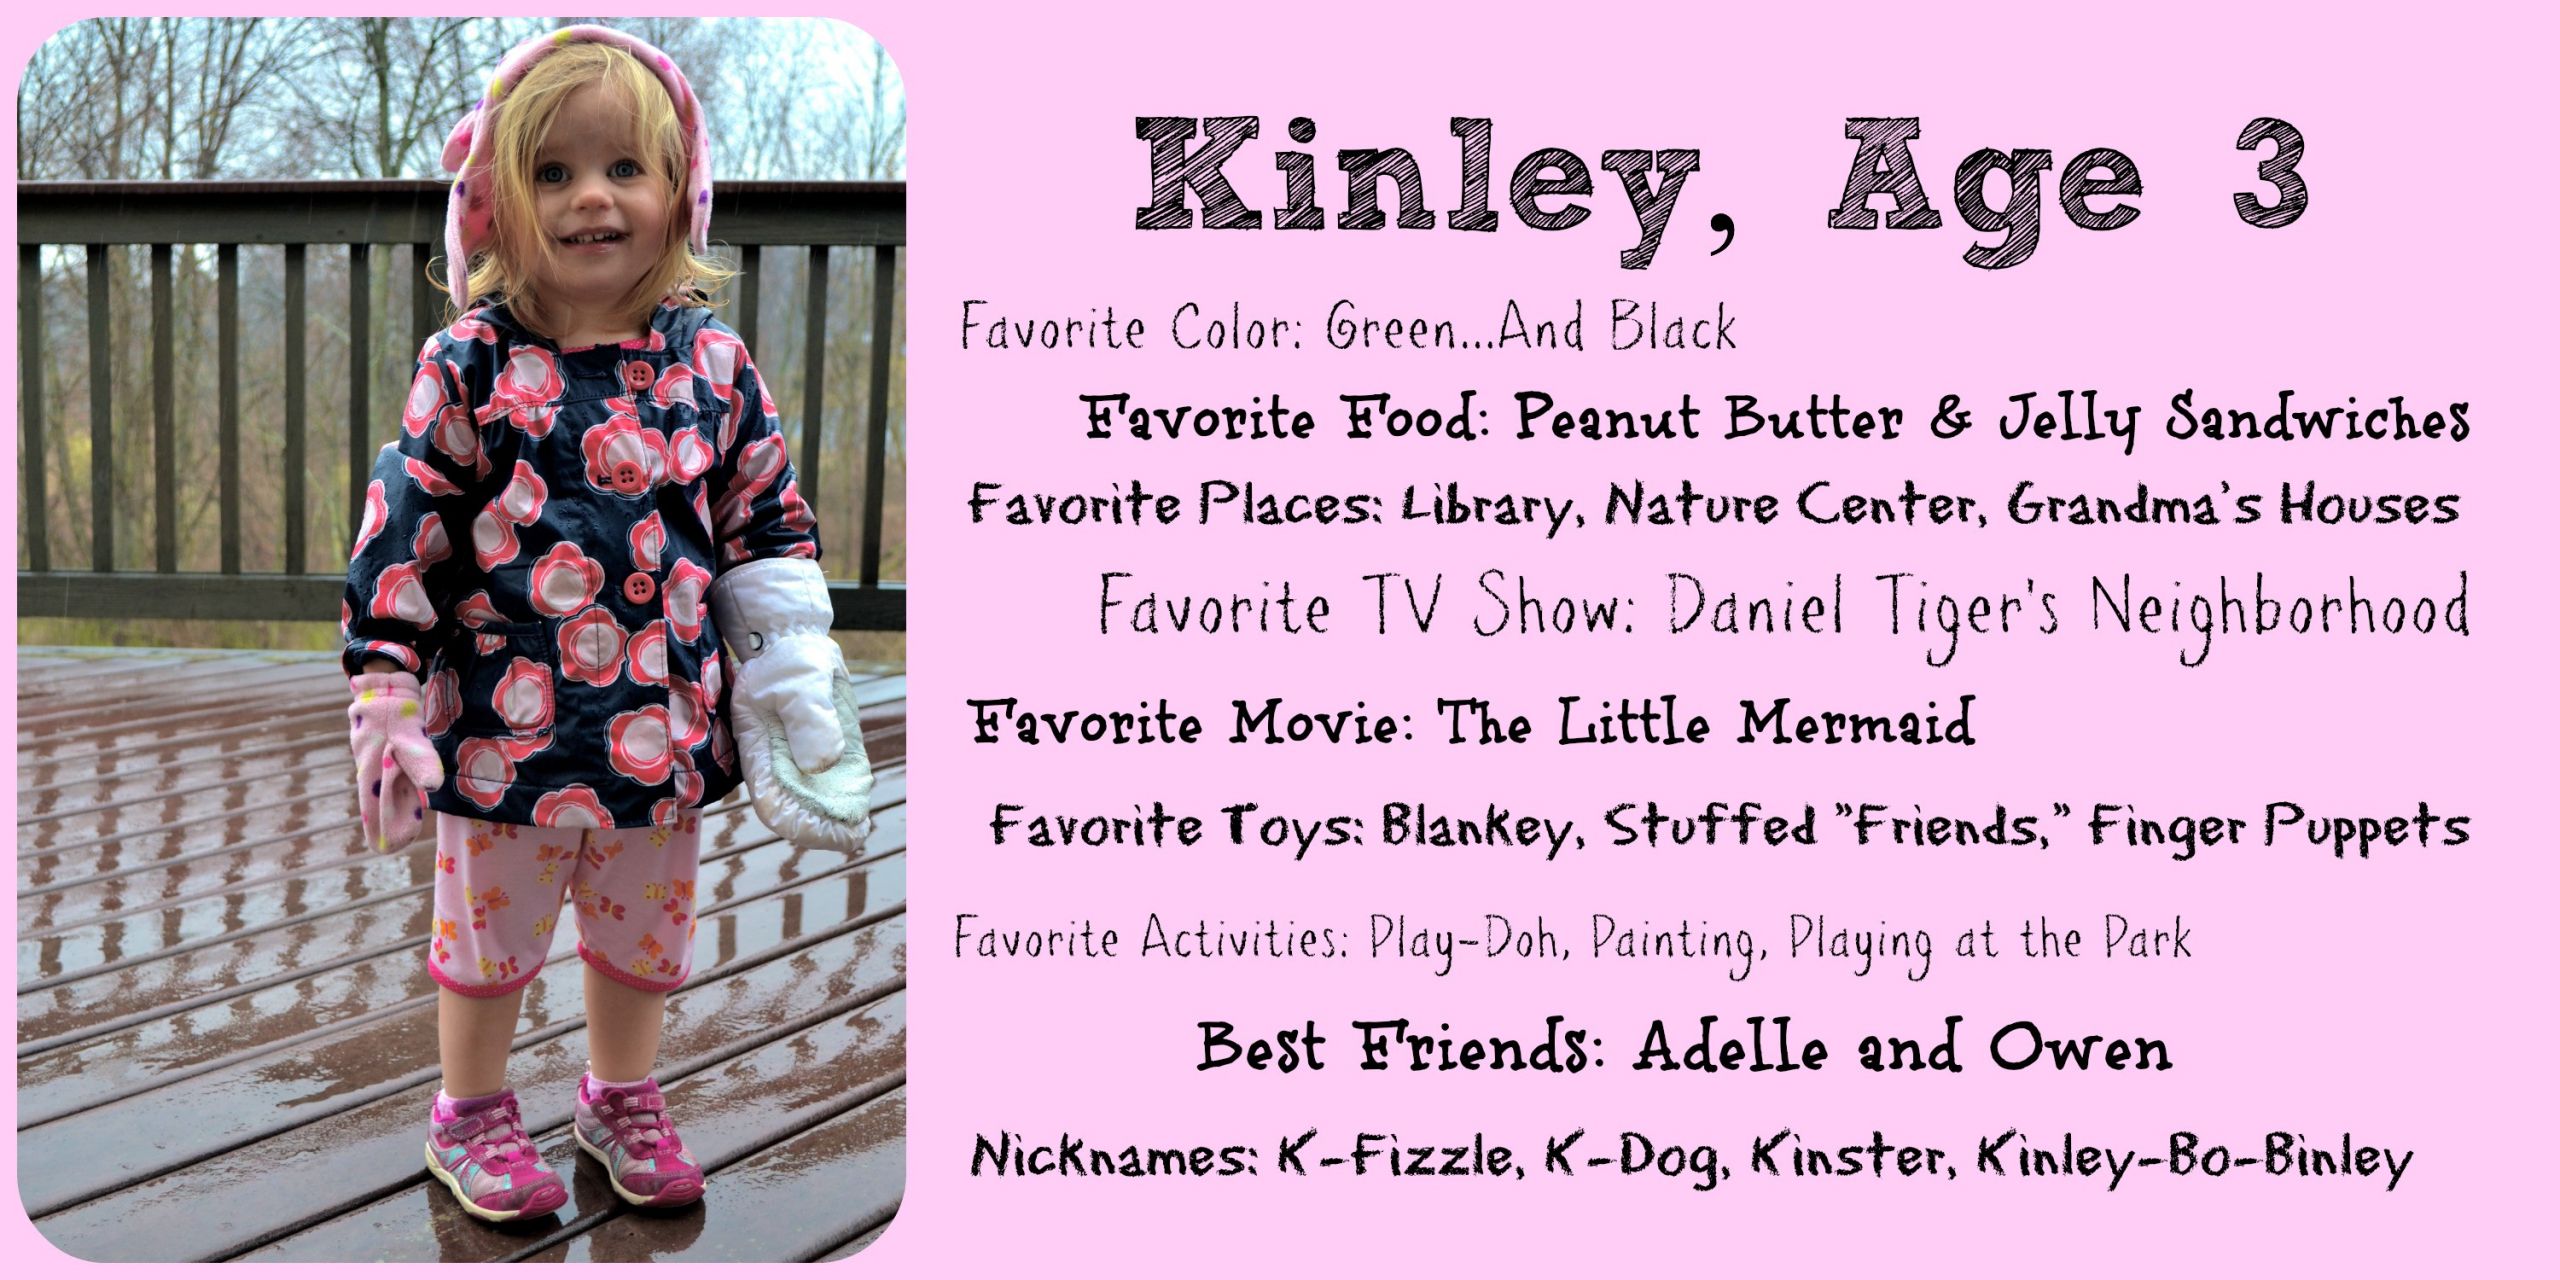 3rd Birthday Quotes
 To My Daughter on Her Third Birthday Dearest Kinley